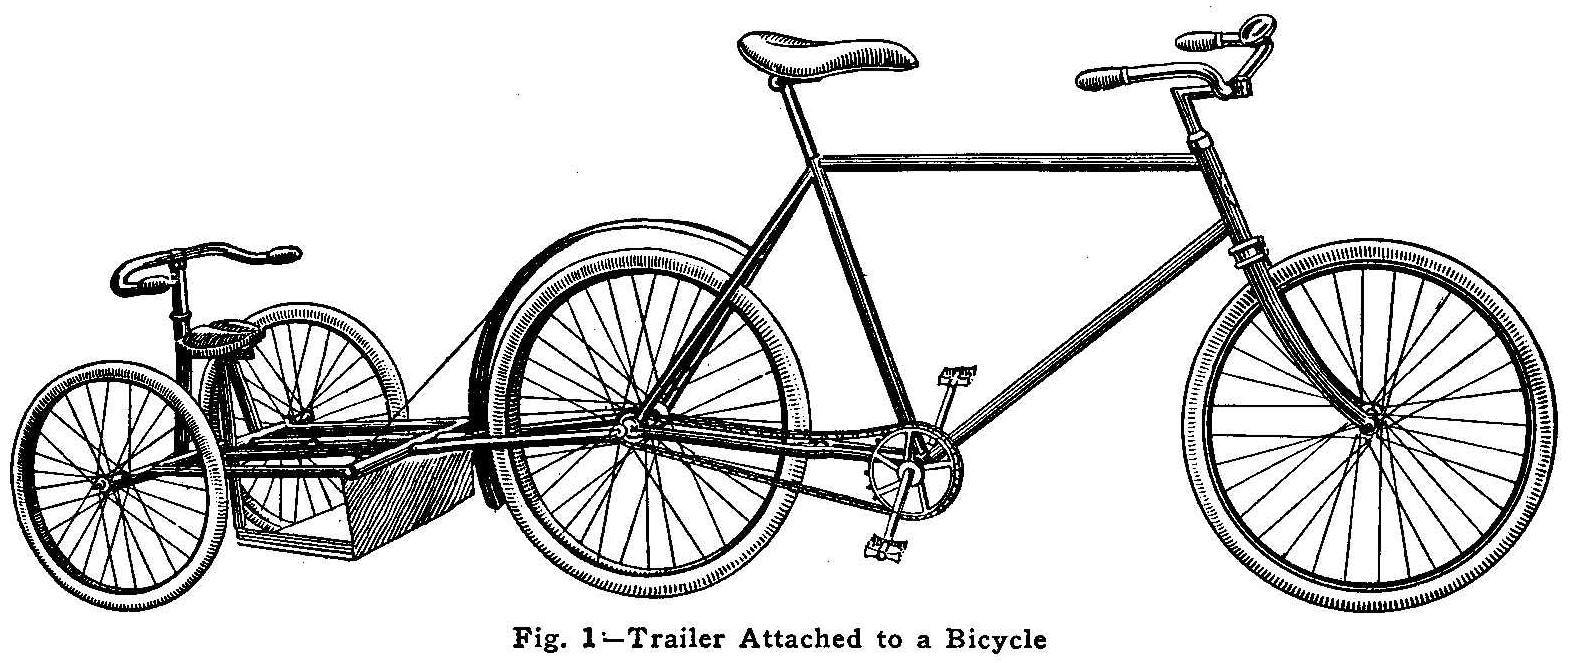 Fig. 1--Trailer Attached to a Bicycle